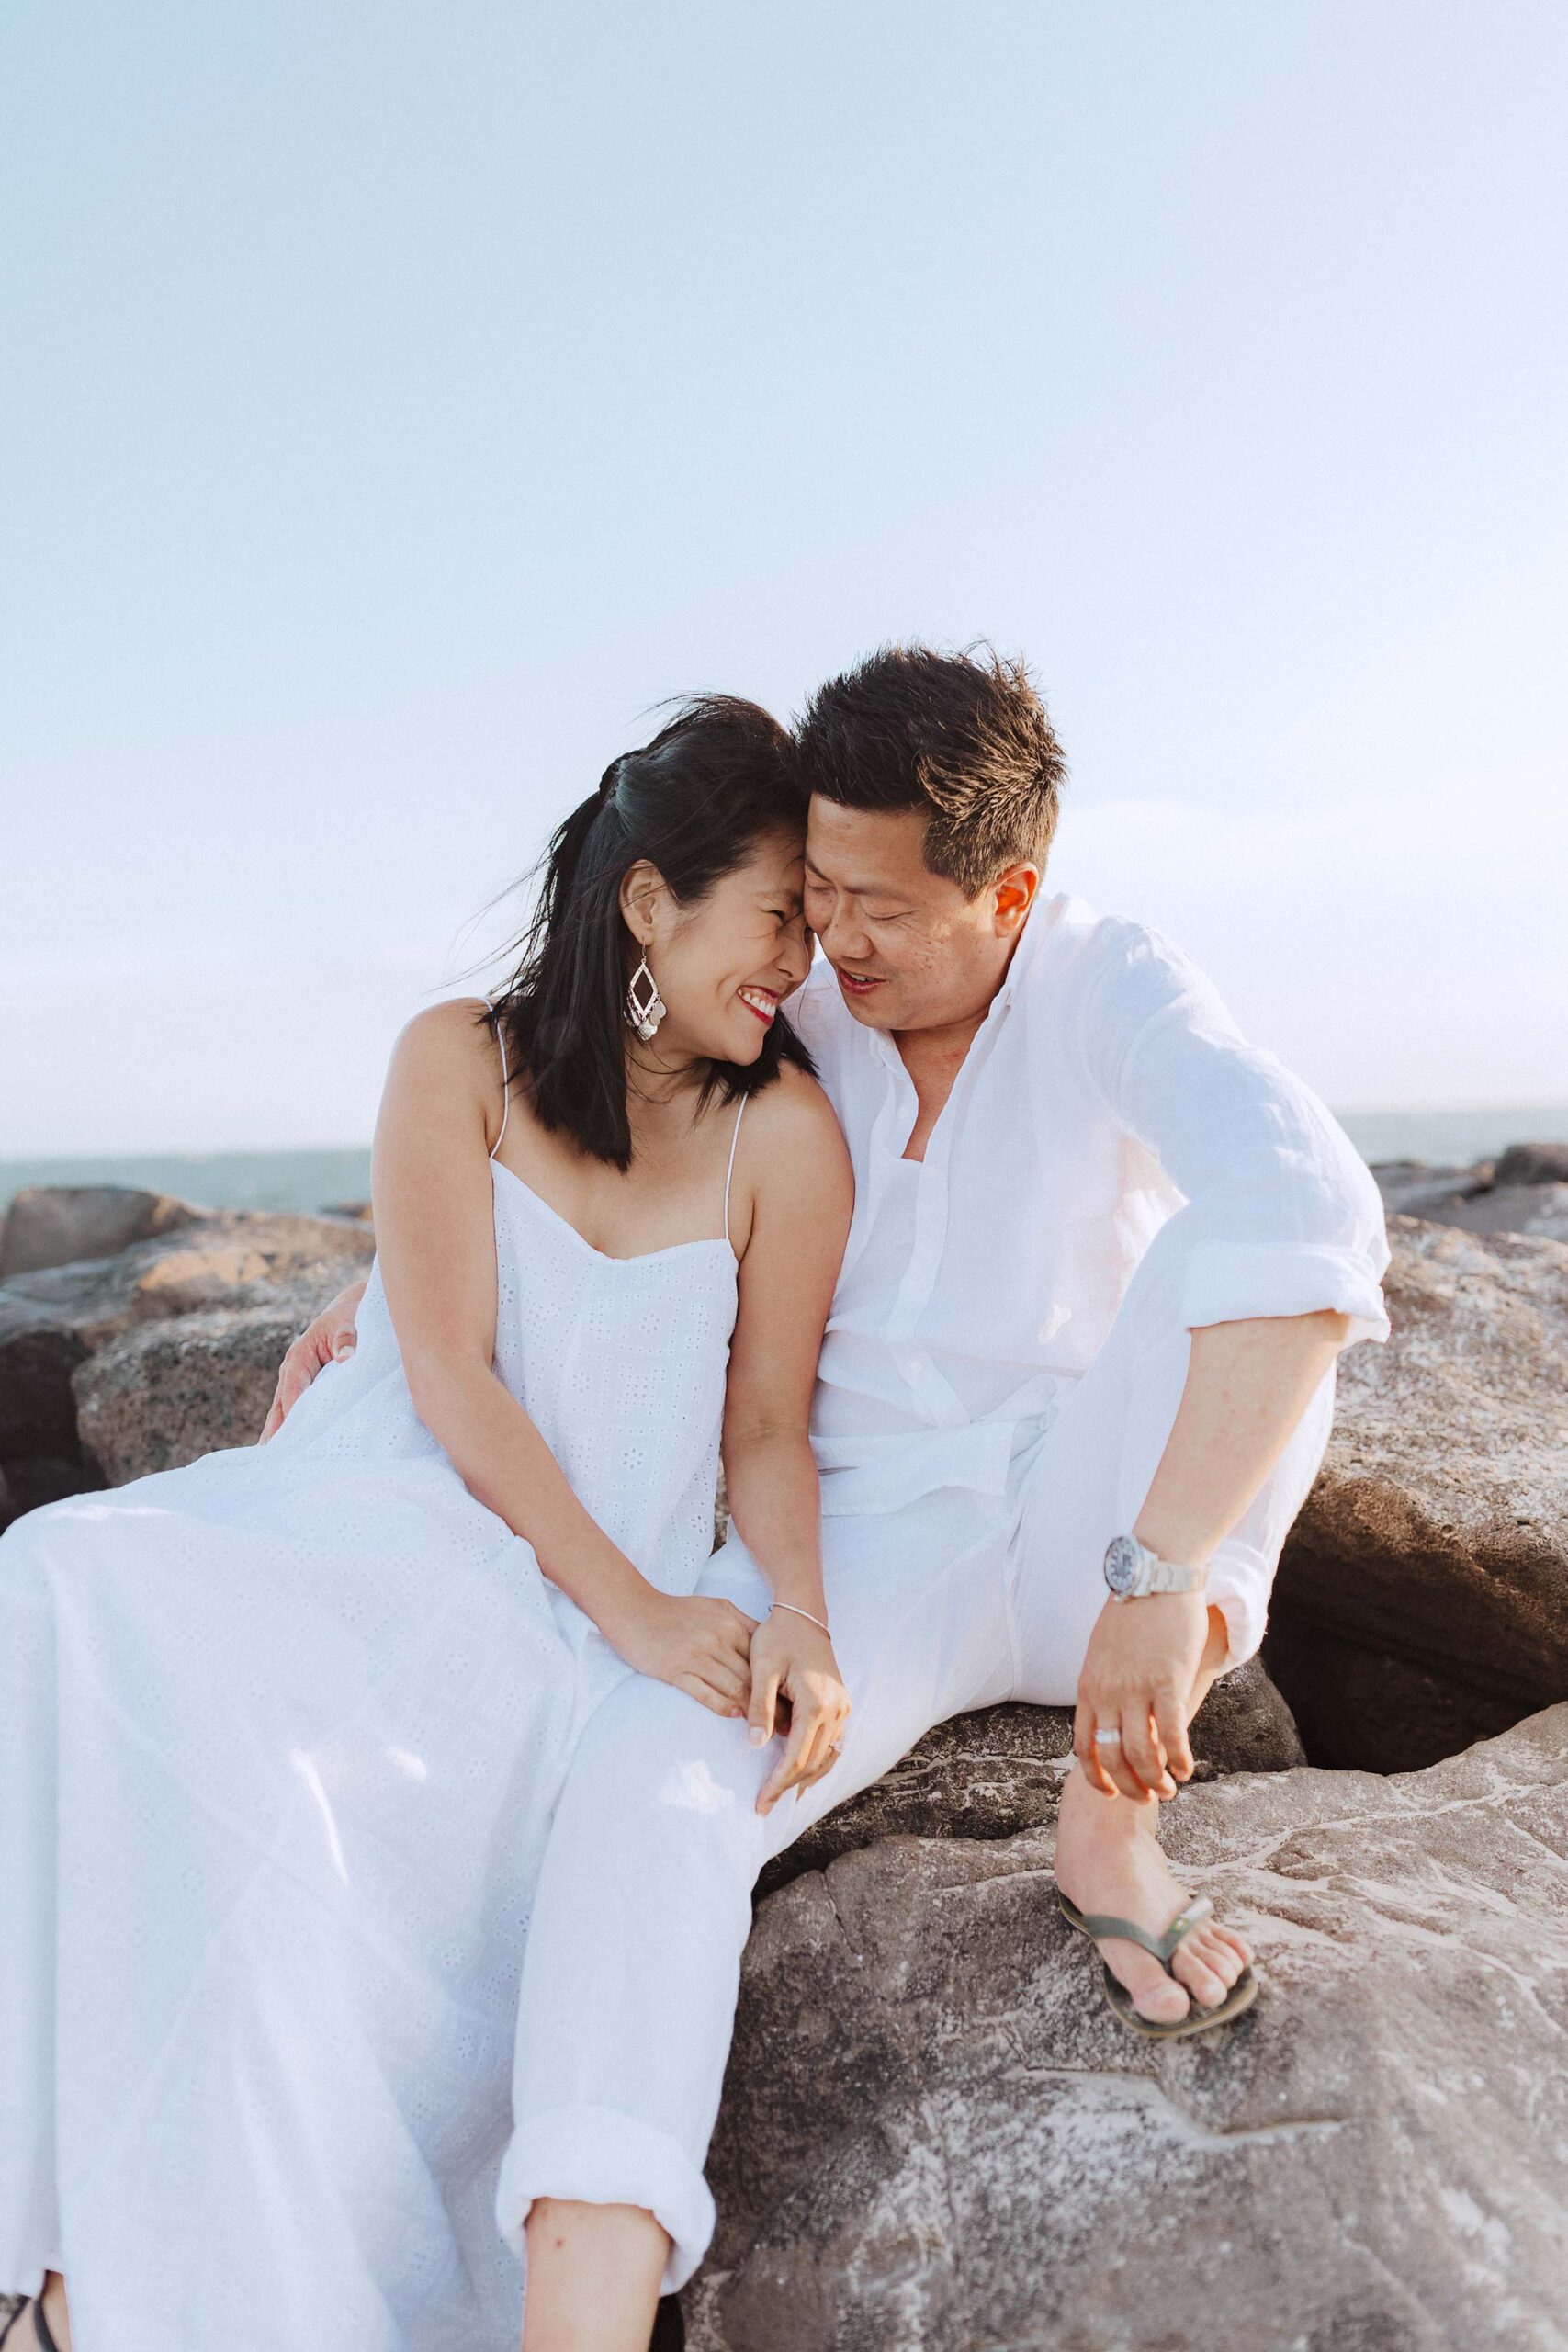 Melbourne Williamstown Pre Wedding Engagement moment with beach stones